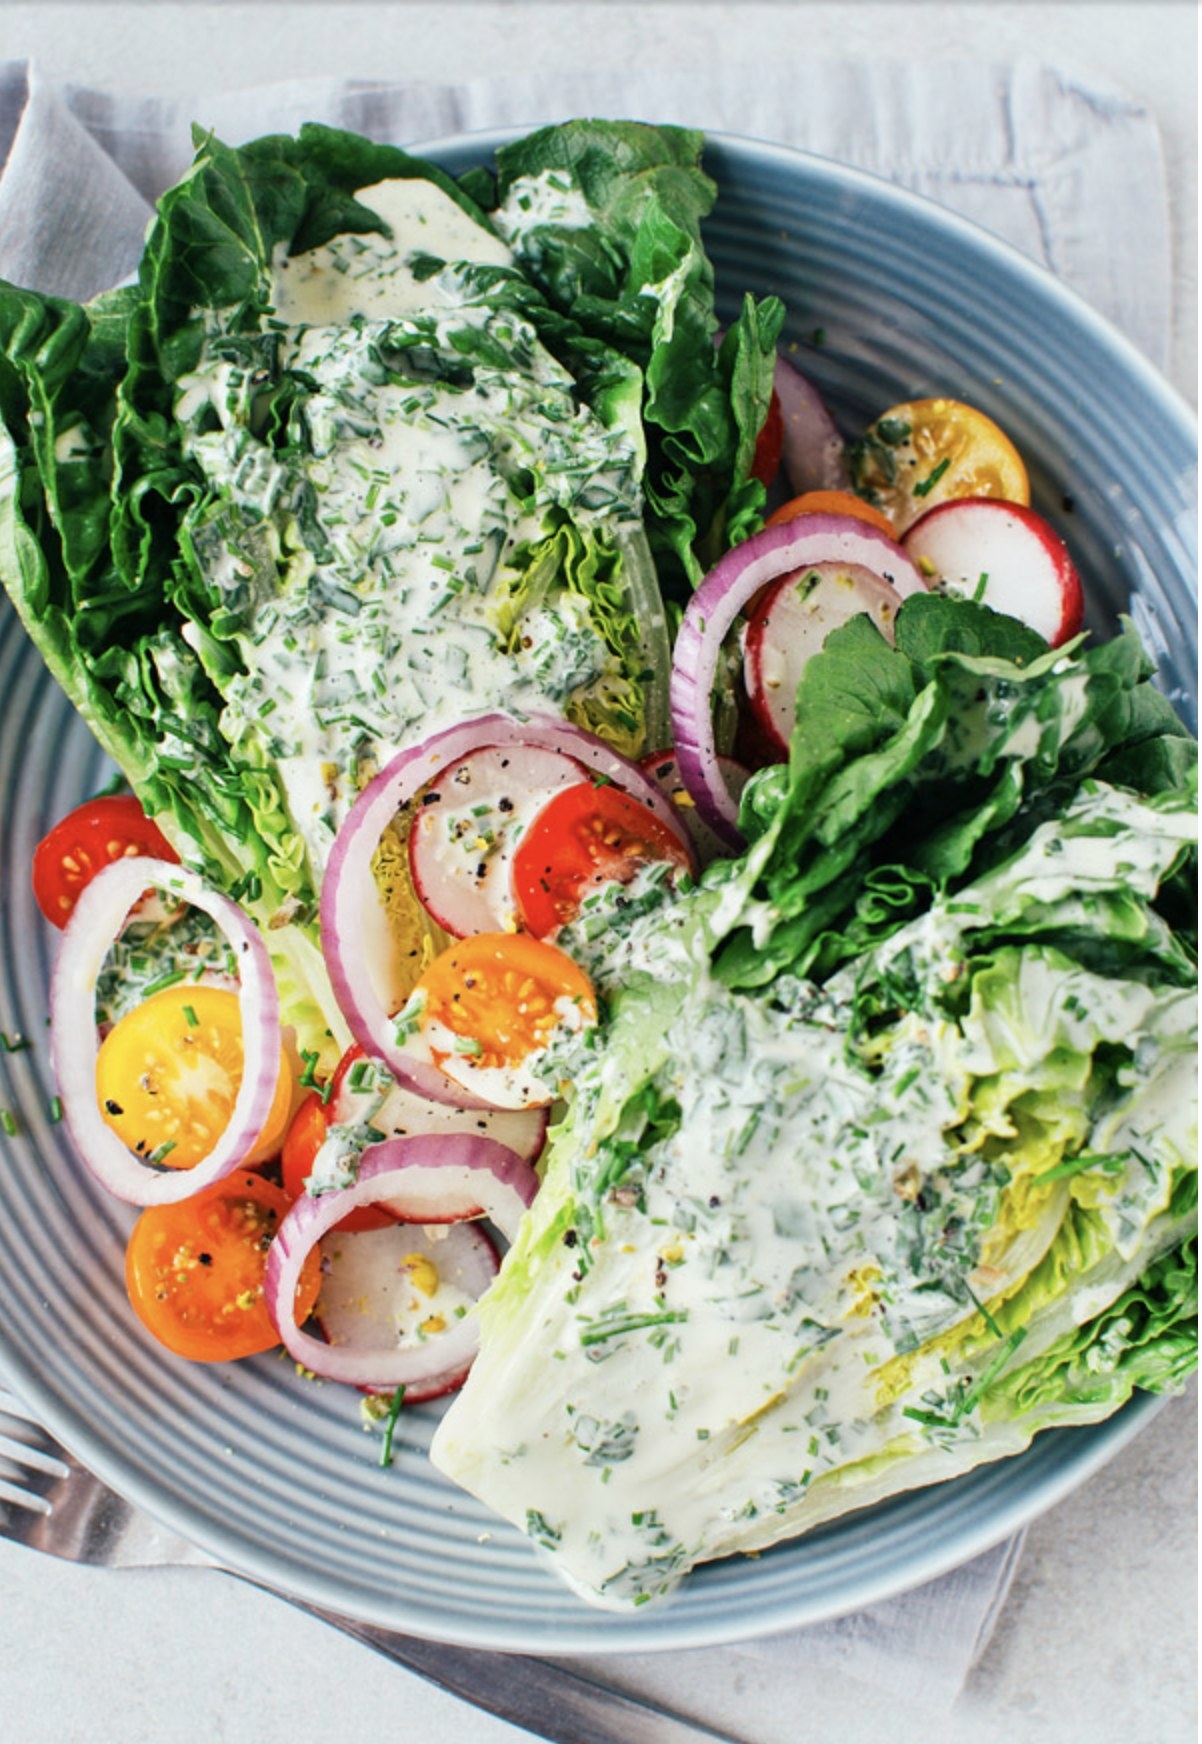 A plate of fresh salad with lettuce, sliced red onions, cherry tomatoes, and radishes, topped with a creamy herb dressing